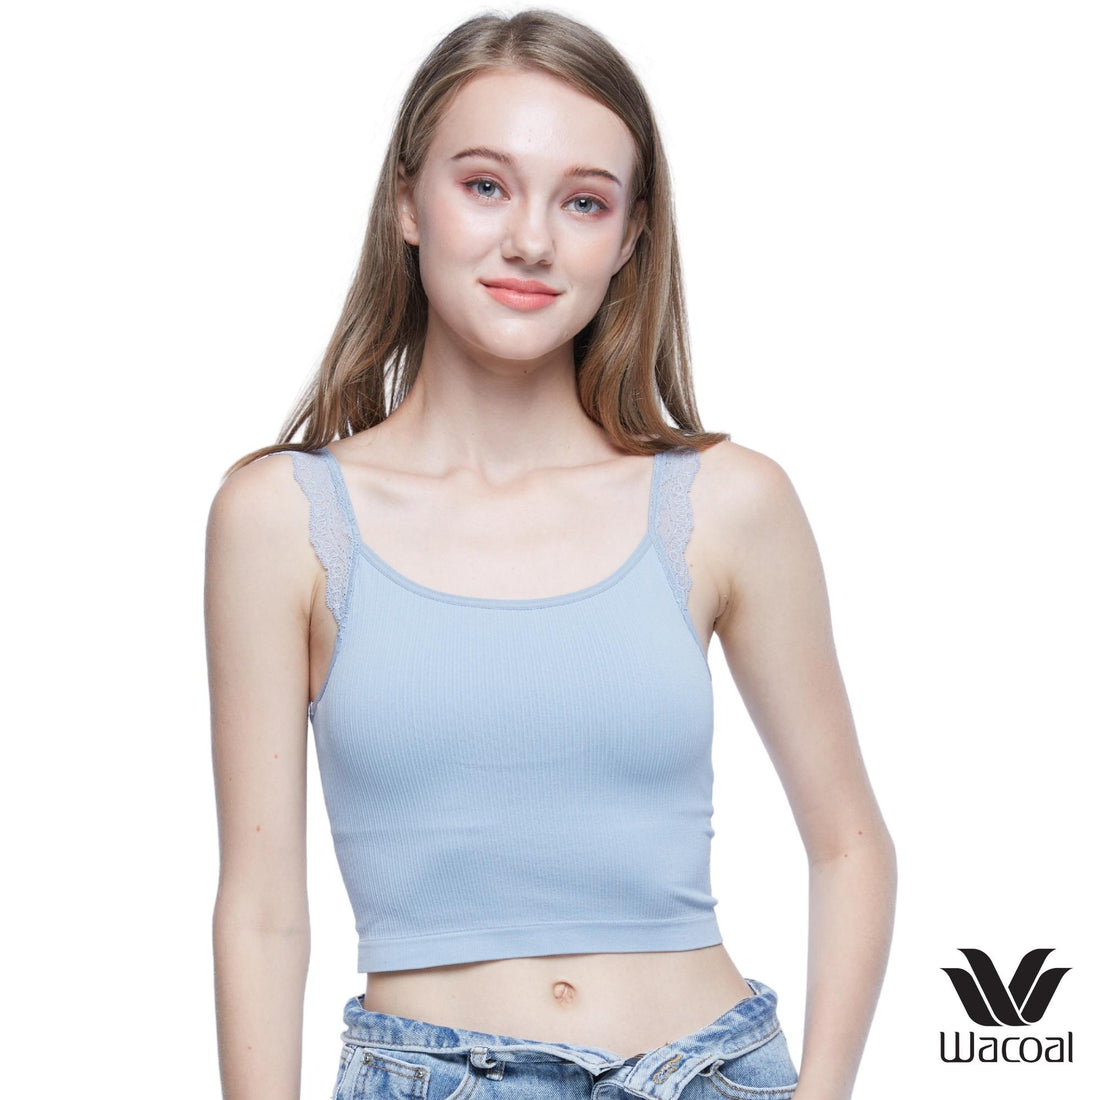 Wacoal Mood Comfy, backless camisole, built-in bra, decorated with lace, Wacoal Mood, model WH4M05, gray (GY)